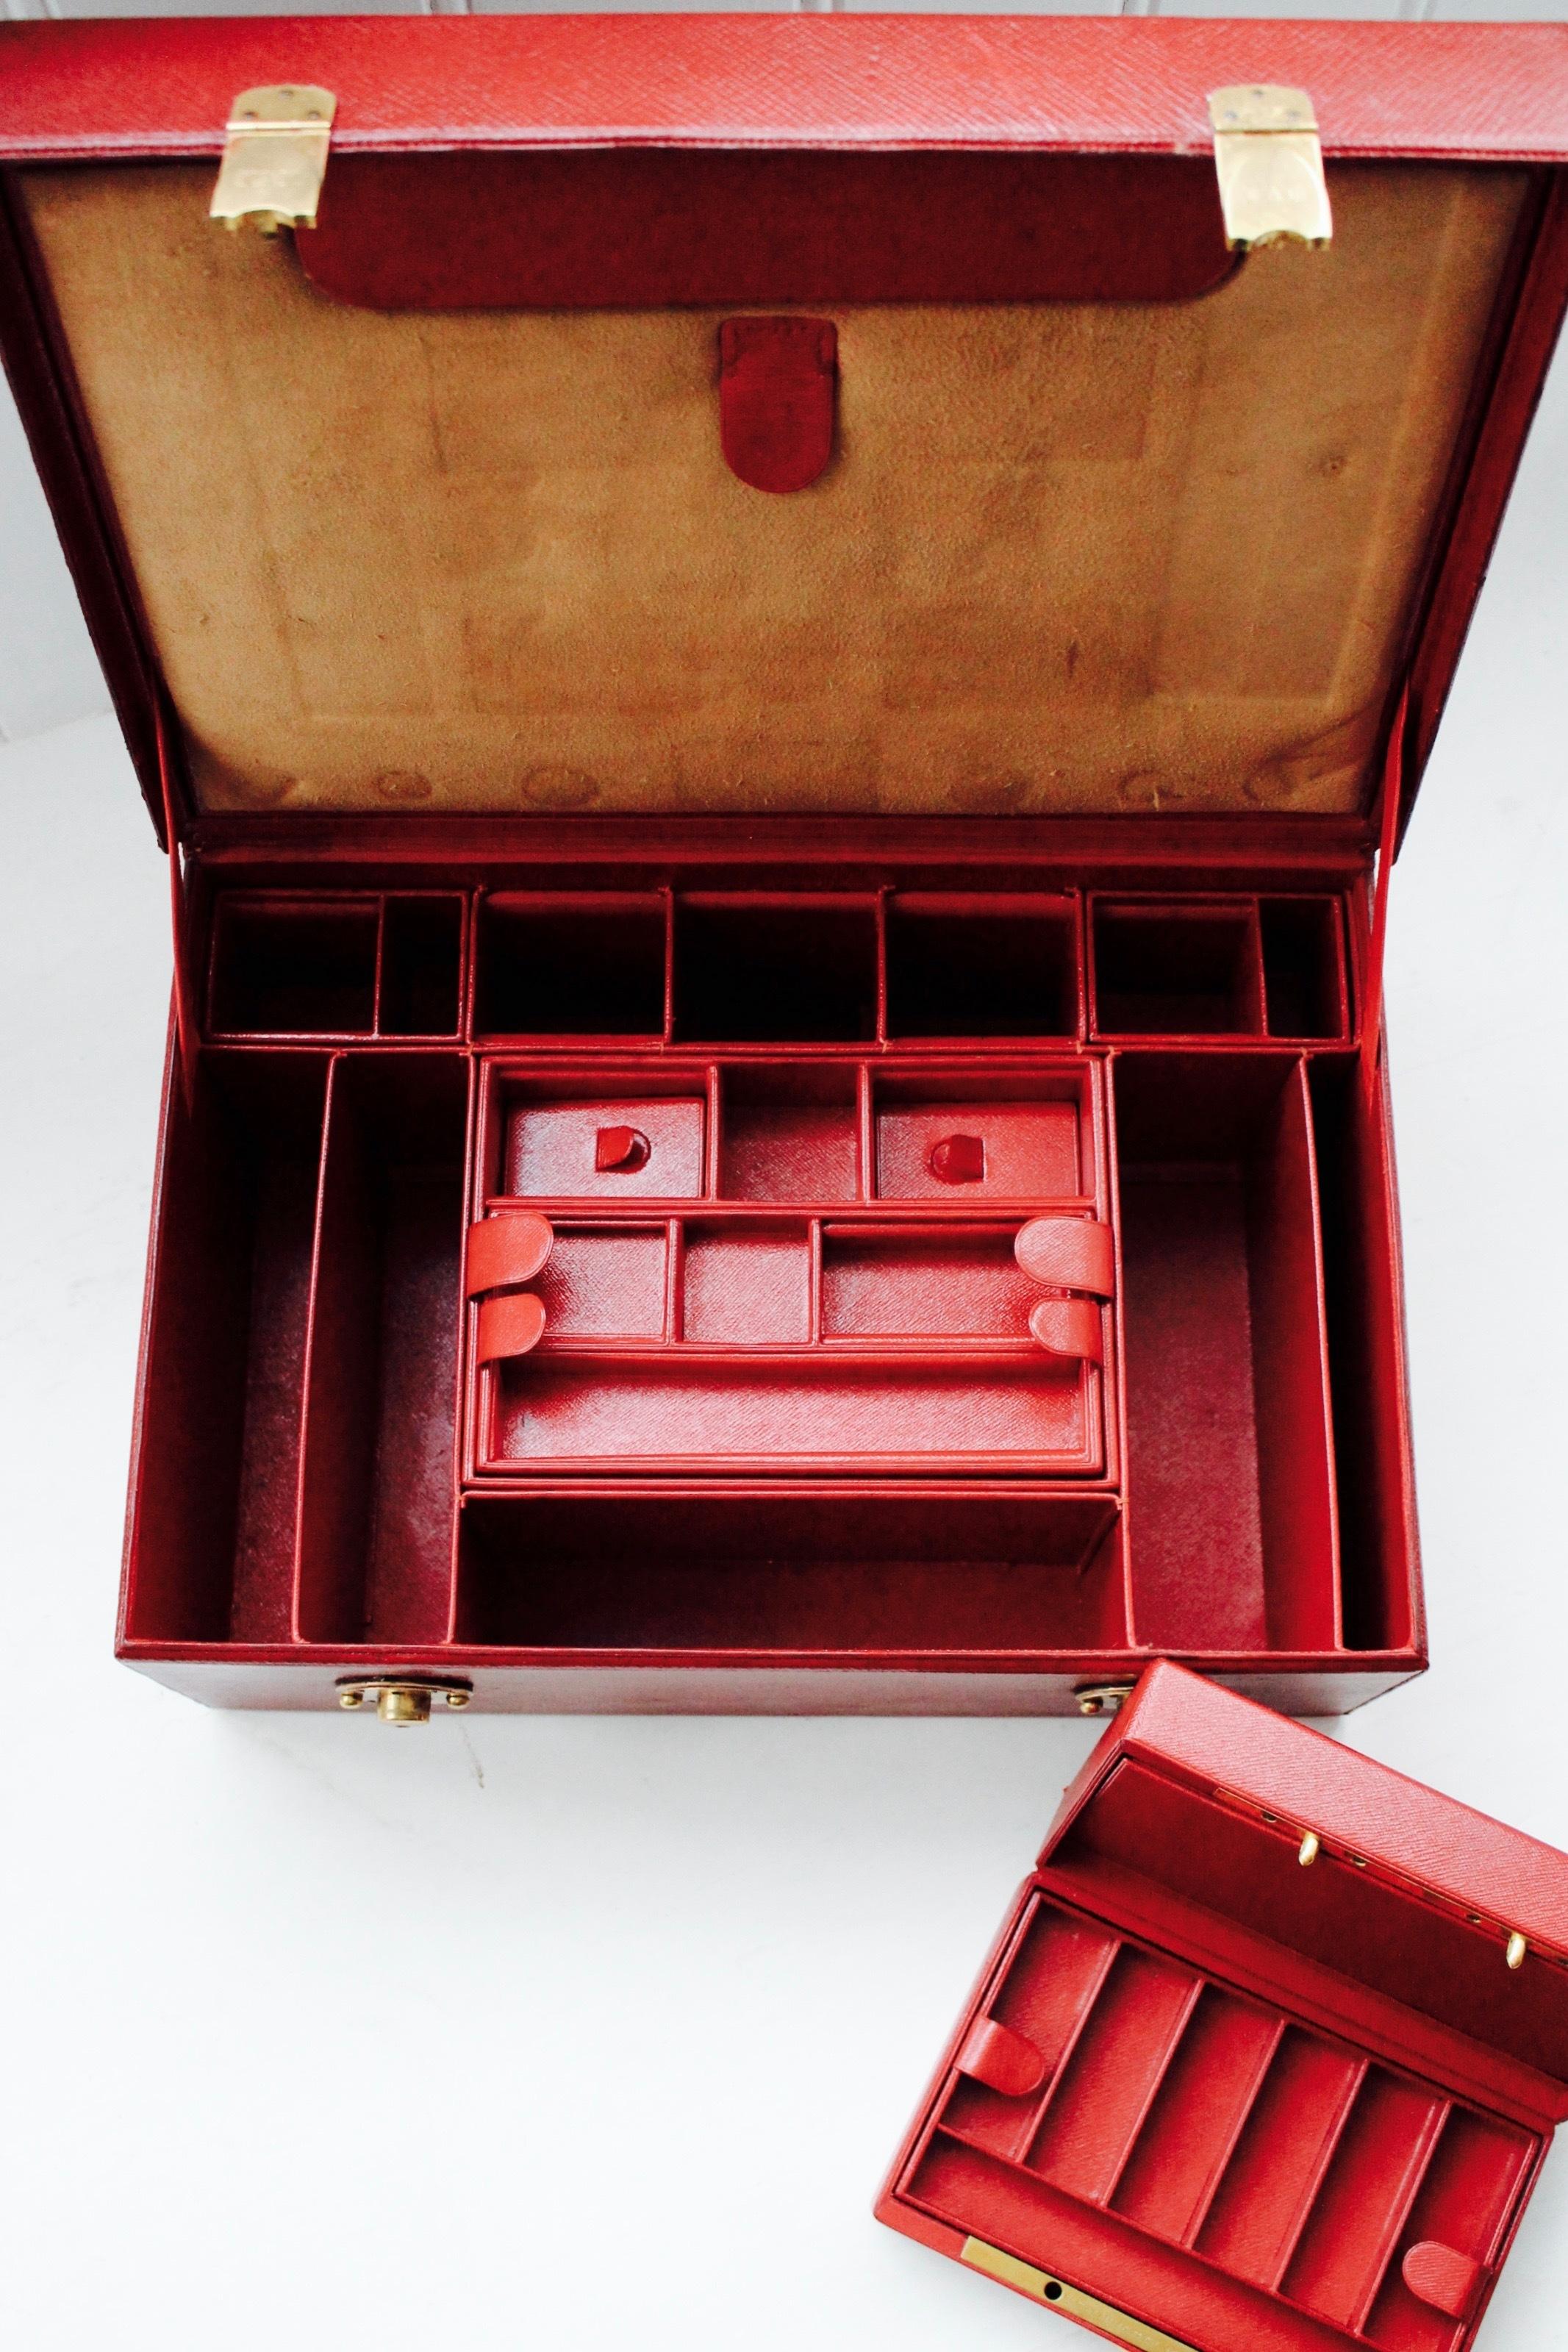 A fine French leather jewellery/ writing case by Gustave Keller, Paris, circa 1920s, red morocco, gilt escutcheons and fittings, the interior fitted with a writing case in the lid, fitted jewel trays and a box with key.